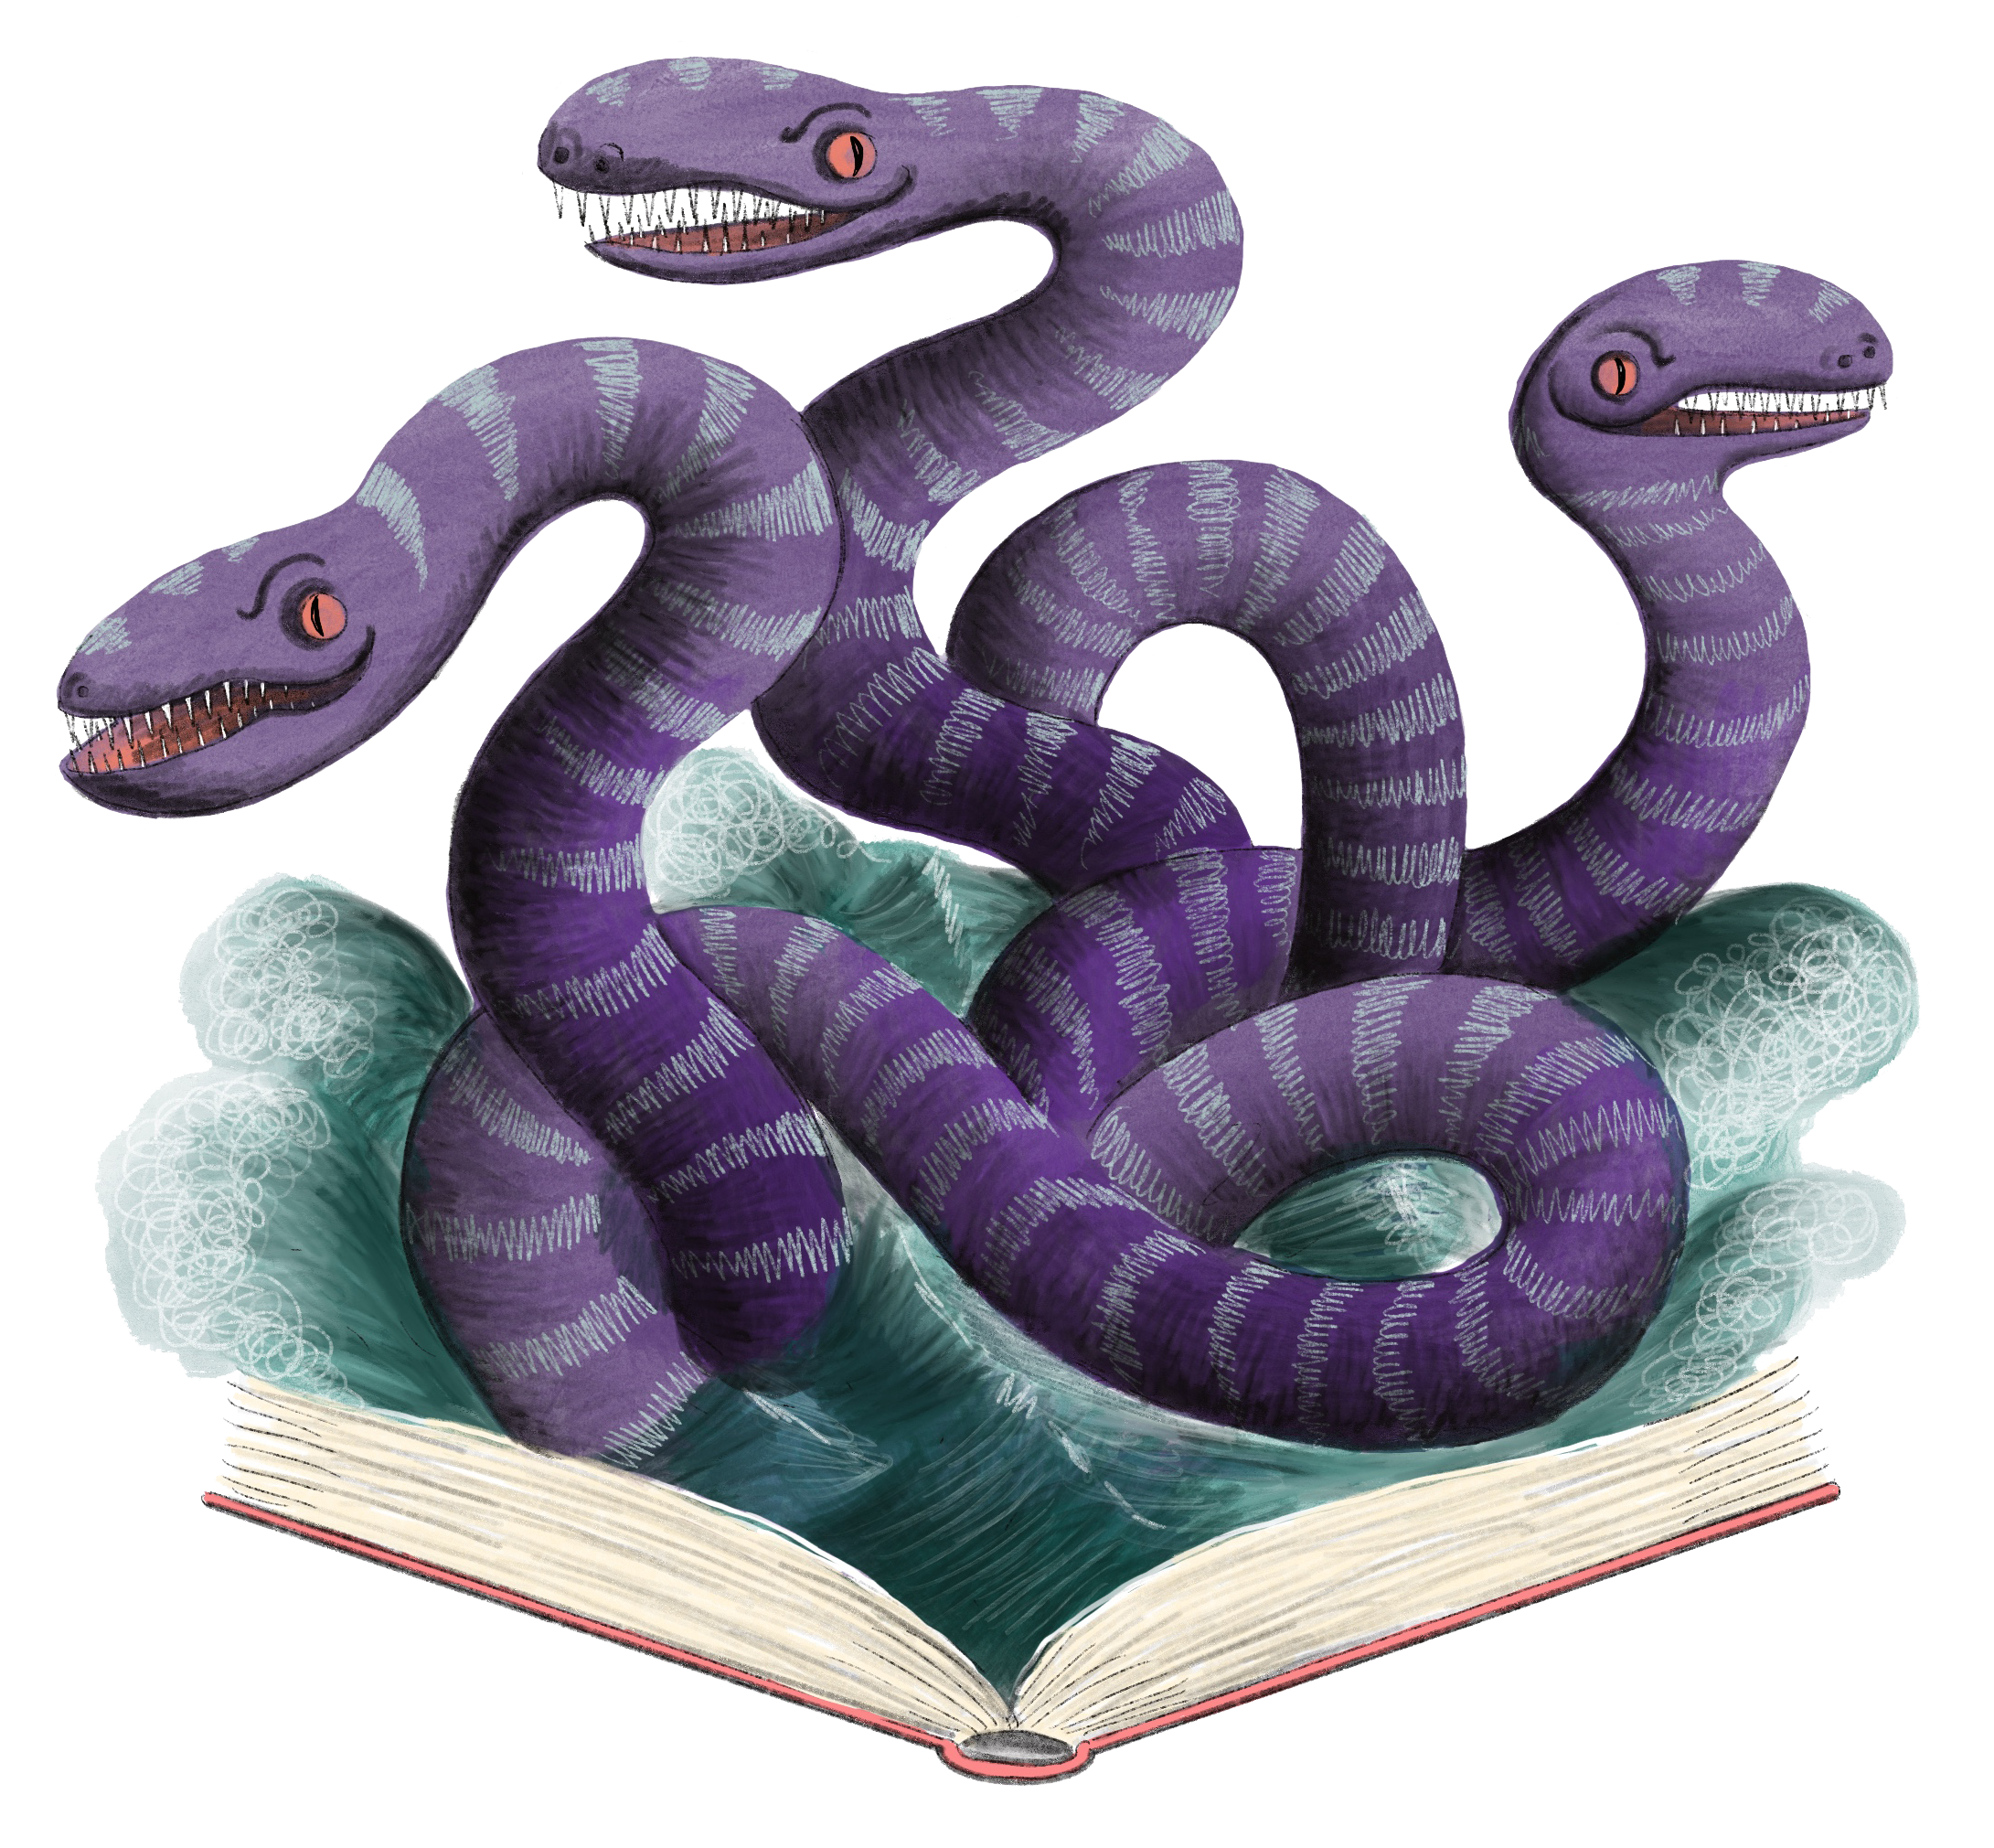 Sea serpents coming out of a book.